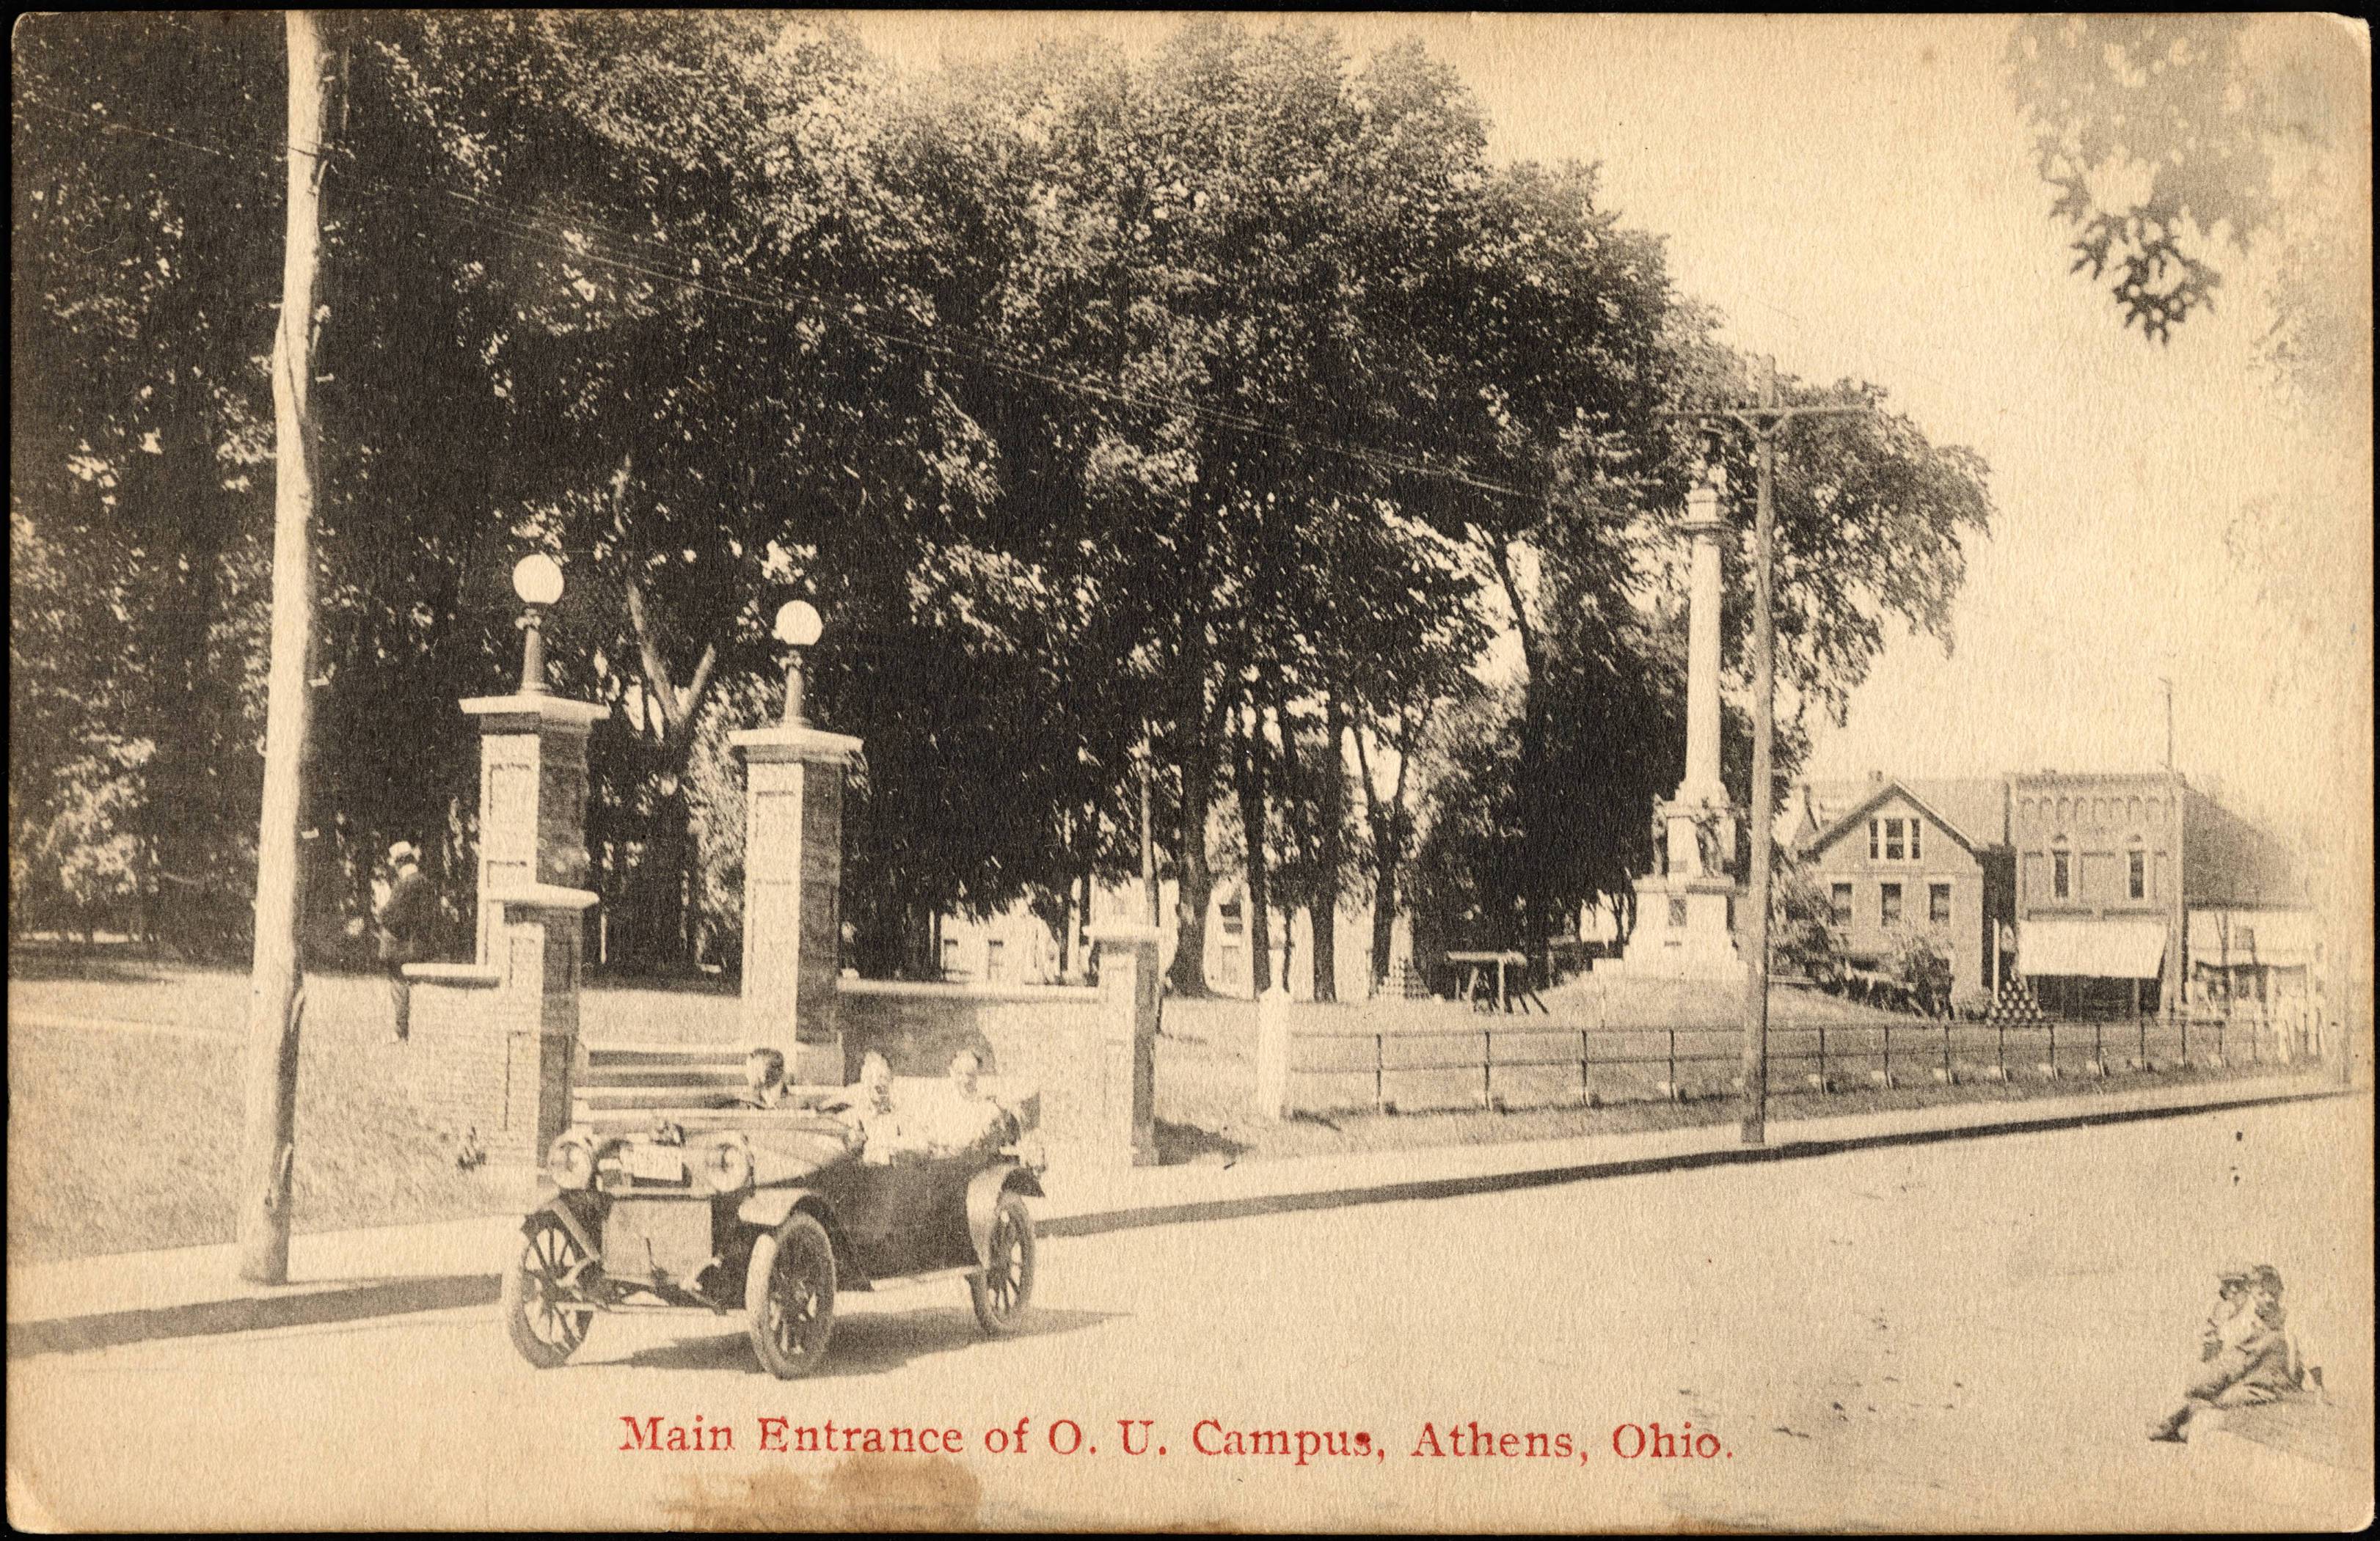 This photo, circa 1920, shows the main campus entrance and the monument, seen on the right with its cannon and cannonballs. Photo courtesy the Mahn Center for Archives & Special Collections